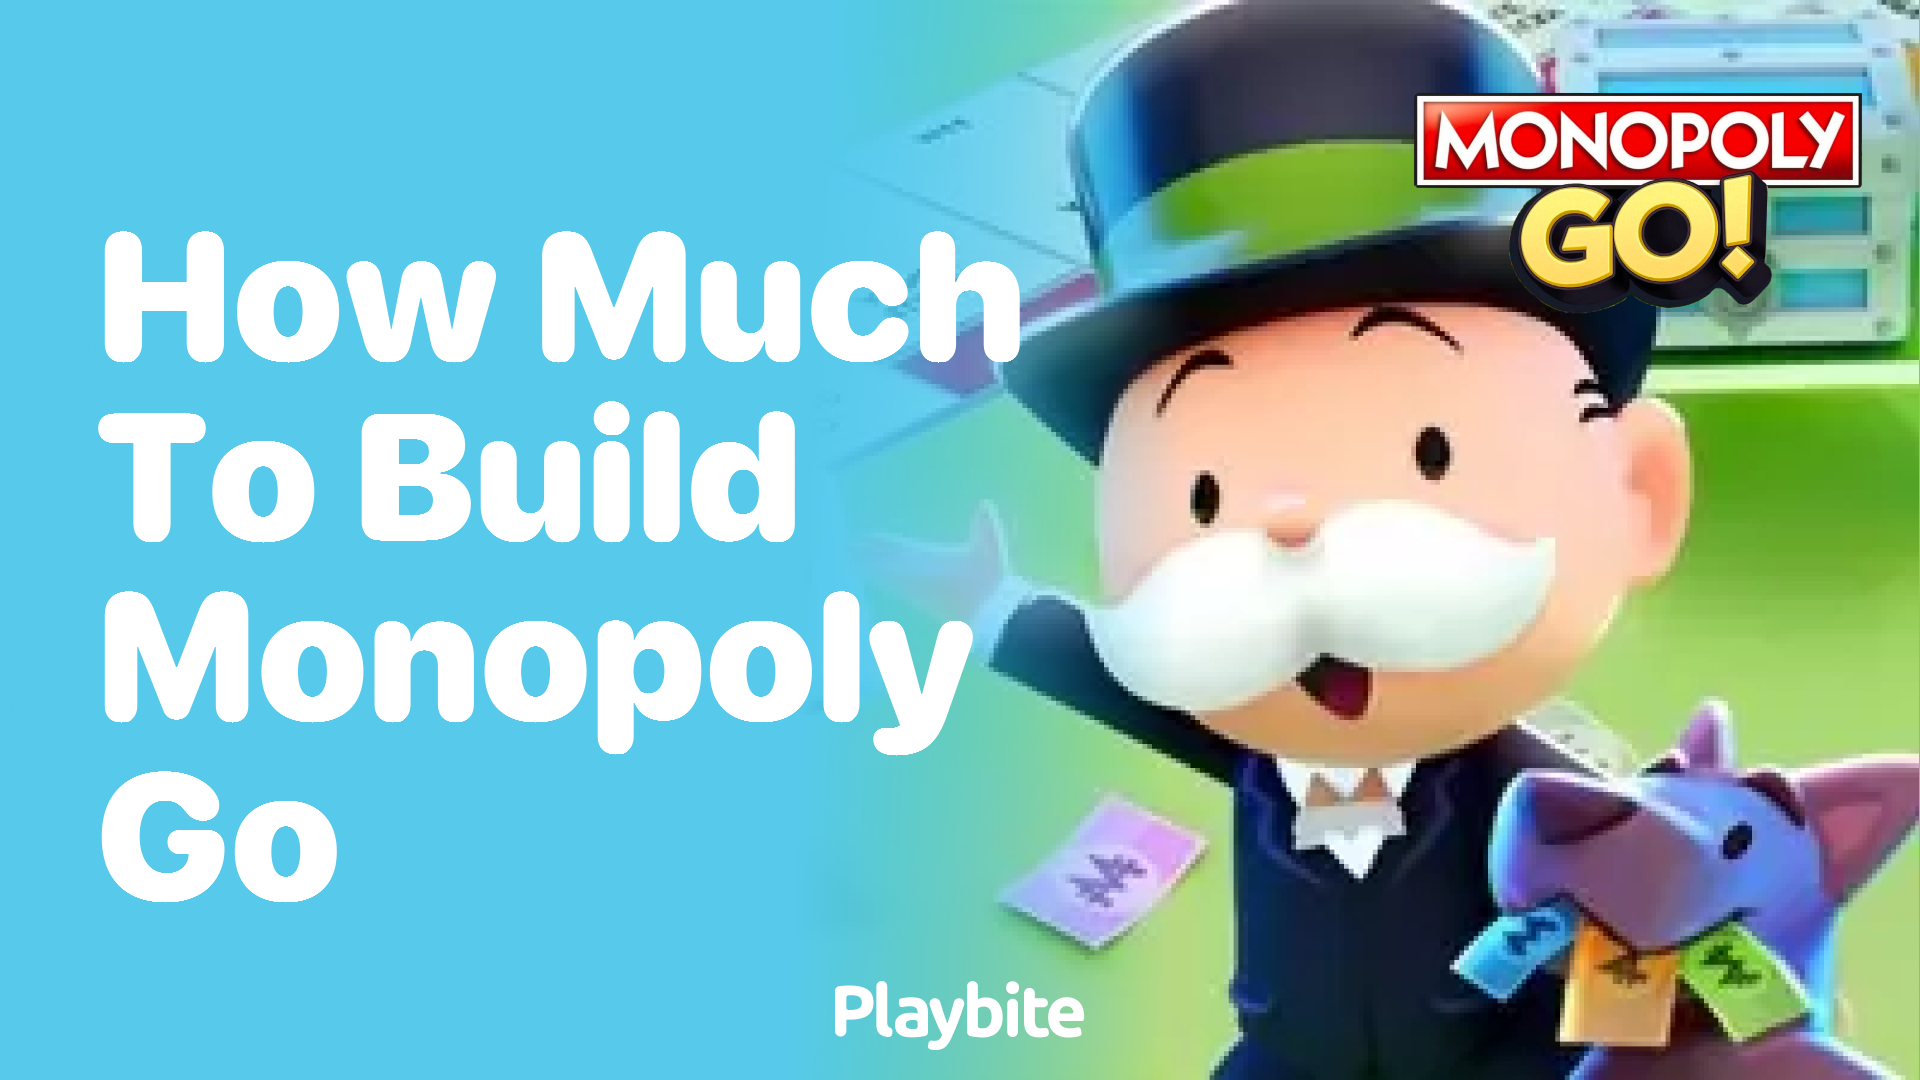 How Much Does It Cost to Build a Game Like Monopoly Go?